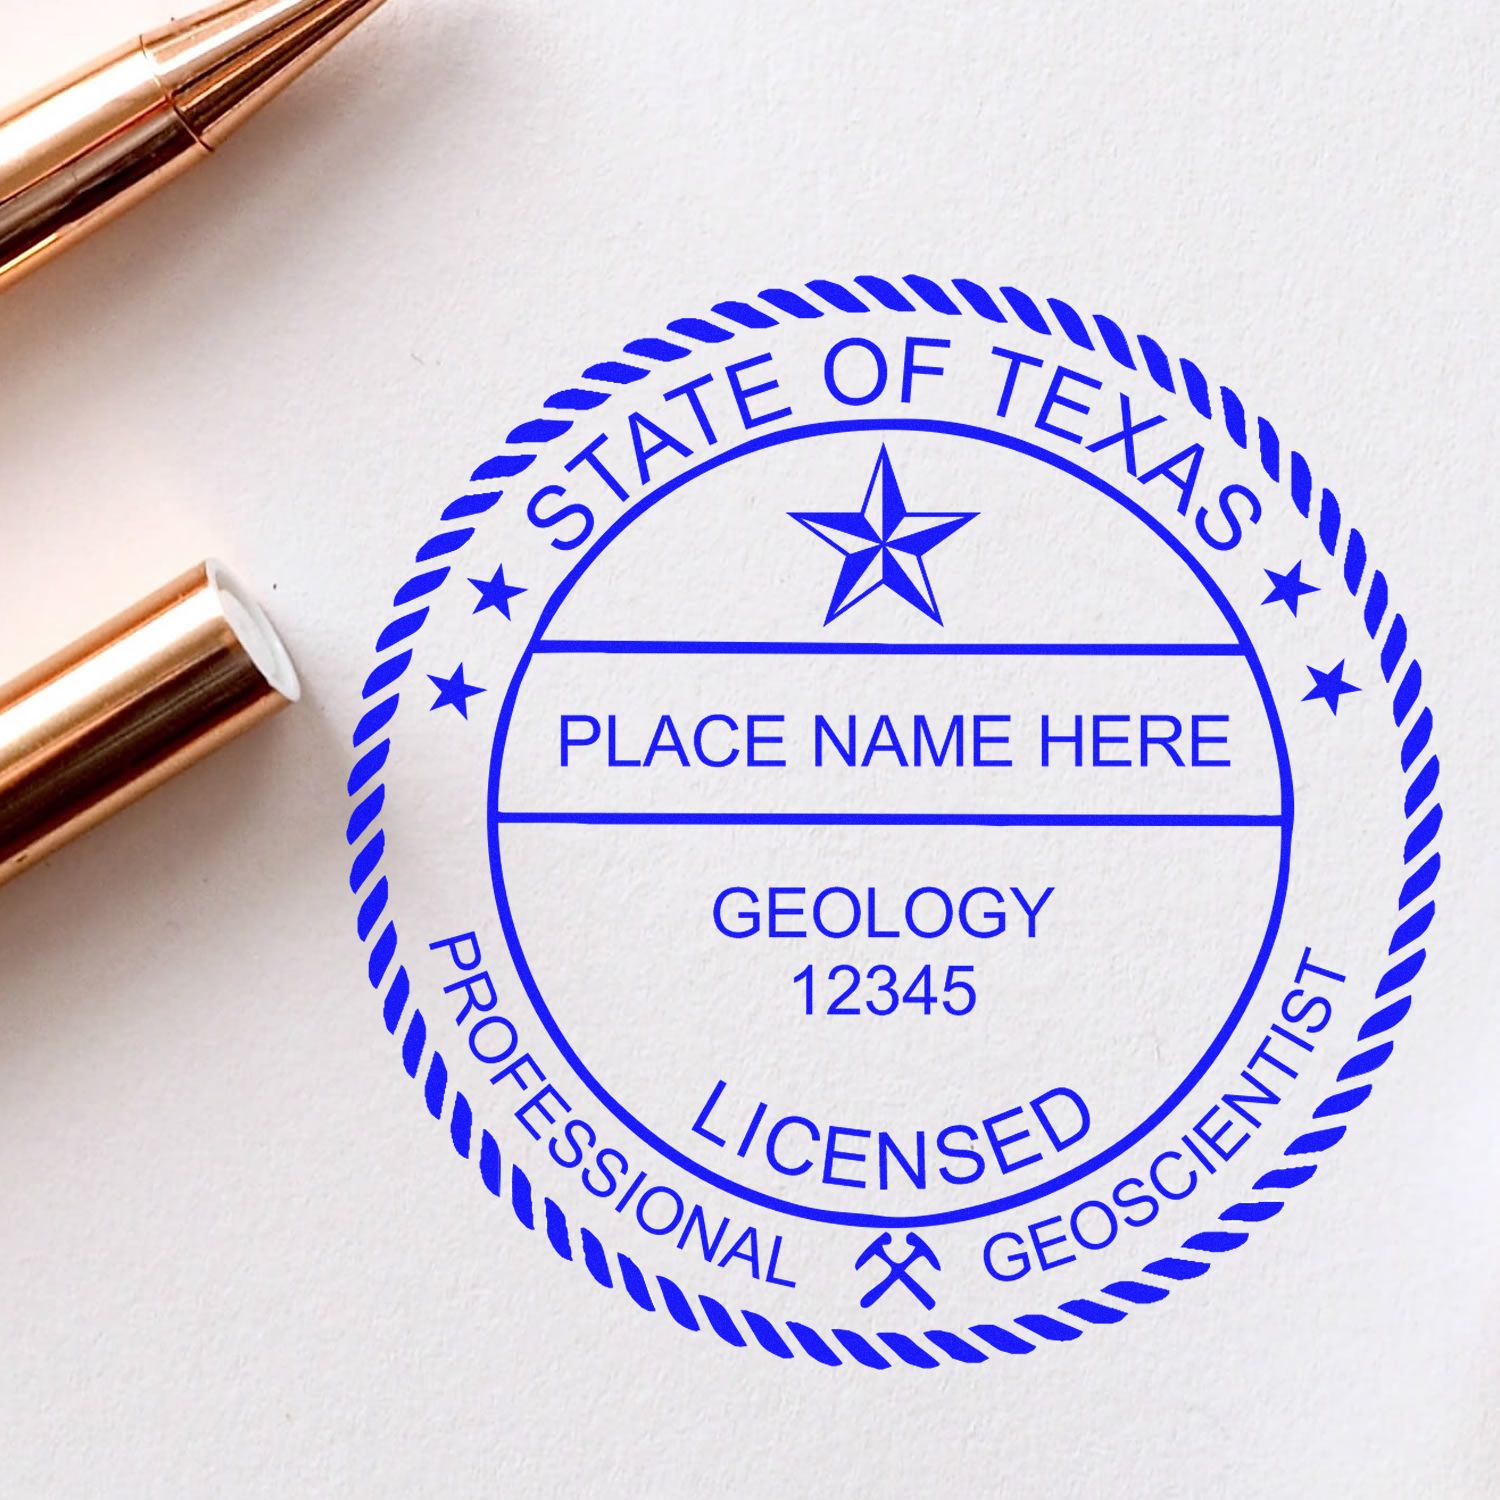 An alternative view of the Slim Pre-Inked Texas Professional Geologist Seal Stamp stamped on a sheet of paper showing the image in use